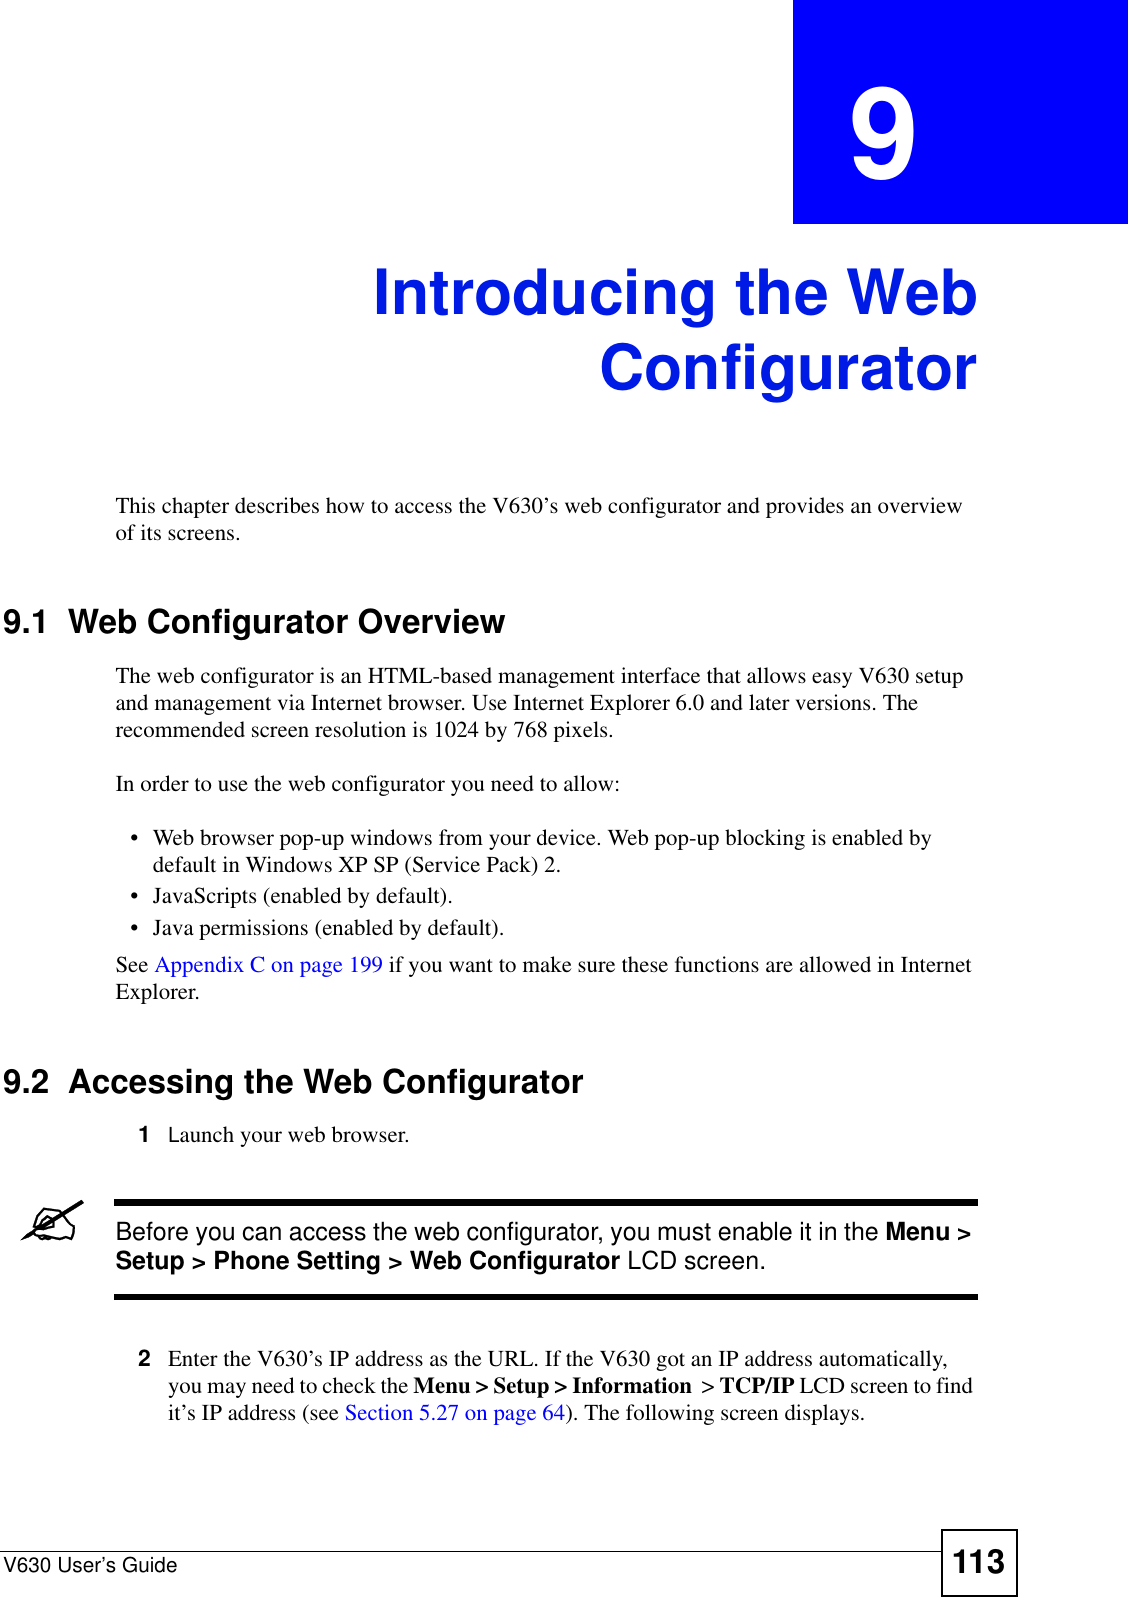 V630 User’s Guide 113CHAPTER  9 Introducing the WebConfiguratorThis chapter describes how to access the V630’s web configurator and provides an overview of its screens. 9.1  Web Configurator OverviewThe web configurator is an HTML-based management interface that allows easy V630 setup and management via Internet browser. Use Internet Explorer 6.0 and later versions. The recommended screen resolution is 1024 by 768 pixels.In order to use the web configurator you need to allow:• Web browser pop-up windows from your device. Web pop-up blocking is enabled by default in Windows XP SP (Service Pack) 2.• JavaScripts (enabled by default).• Java permissions (enabled by default).See Appendix C on page 199 if you want to make sure these functions are allowed in Internet Explorer. 9.2  Accessing the Web Configurator1Launch your web browser.&quot;Before you can access the web configurator, you must enable it in the Menu &gt; Setup &gt; Phone Setting &gt; Web Configurator LCD screen.2Enter the V630’s IP address as the URL. If the V630 got an IP address automatically, you may need to check the Menu &gt; Setup &gt; Information  &gt; TCP/IP LCD screen to find it’s IP address (see Section 5.27 on page 64). The following screen displays.